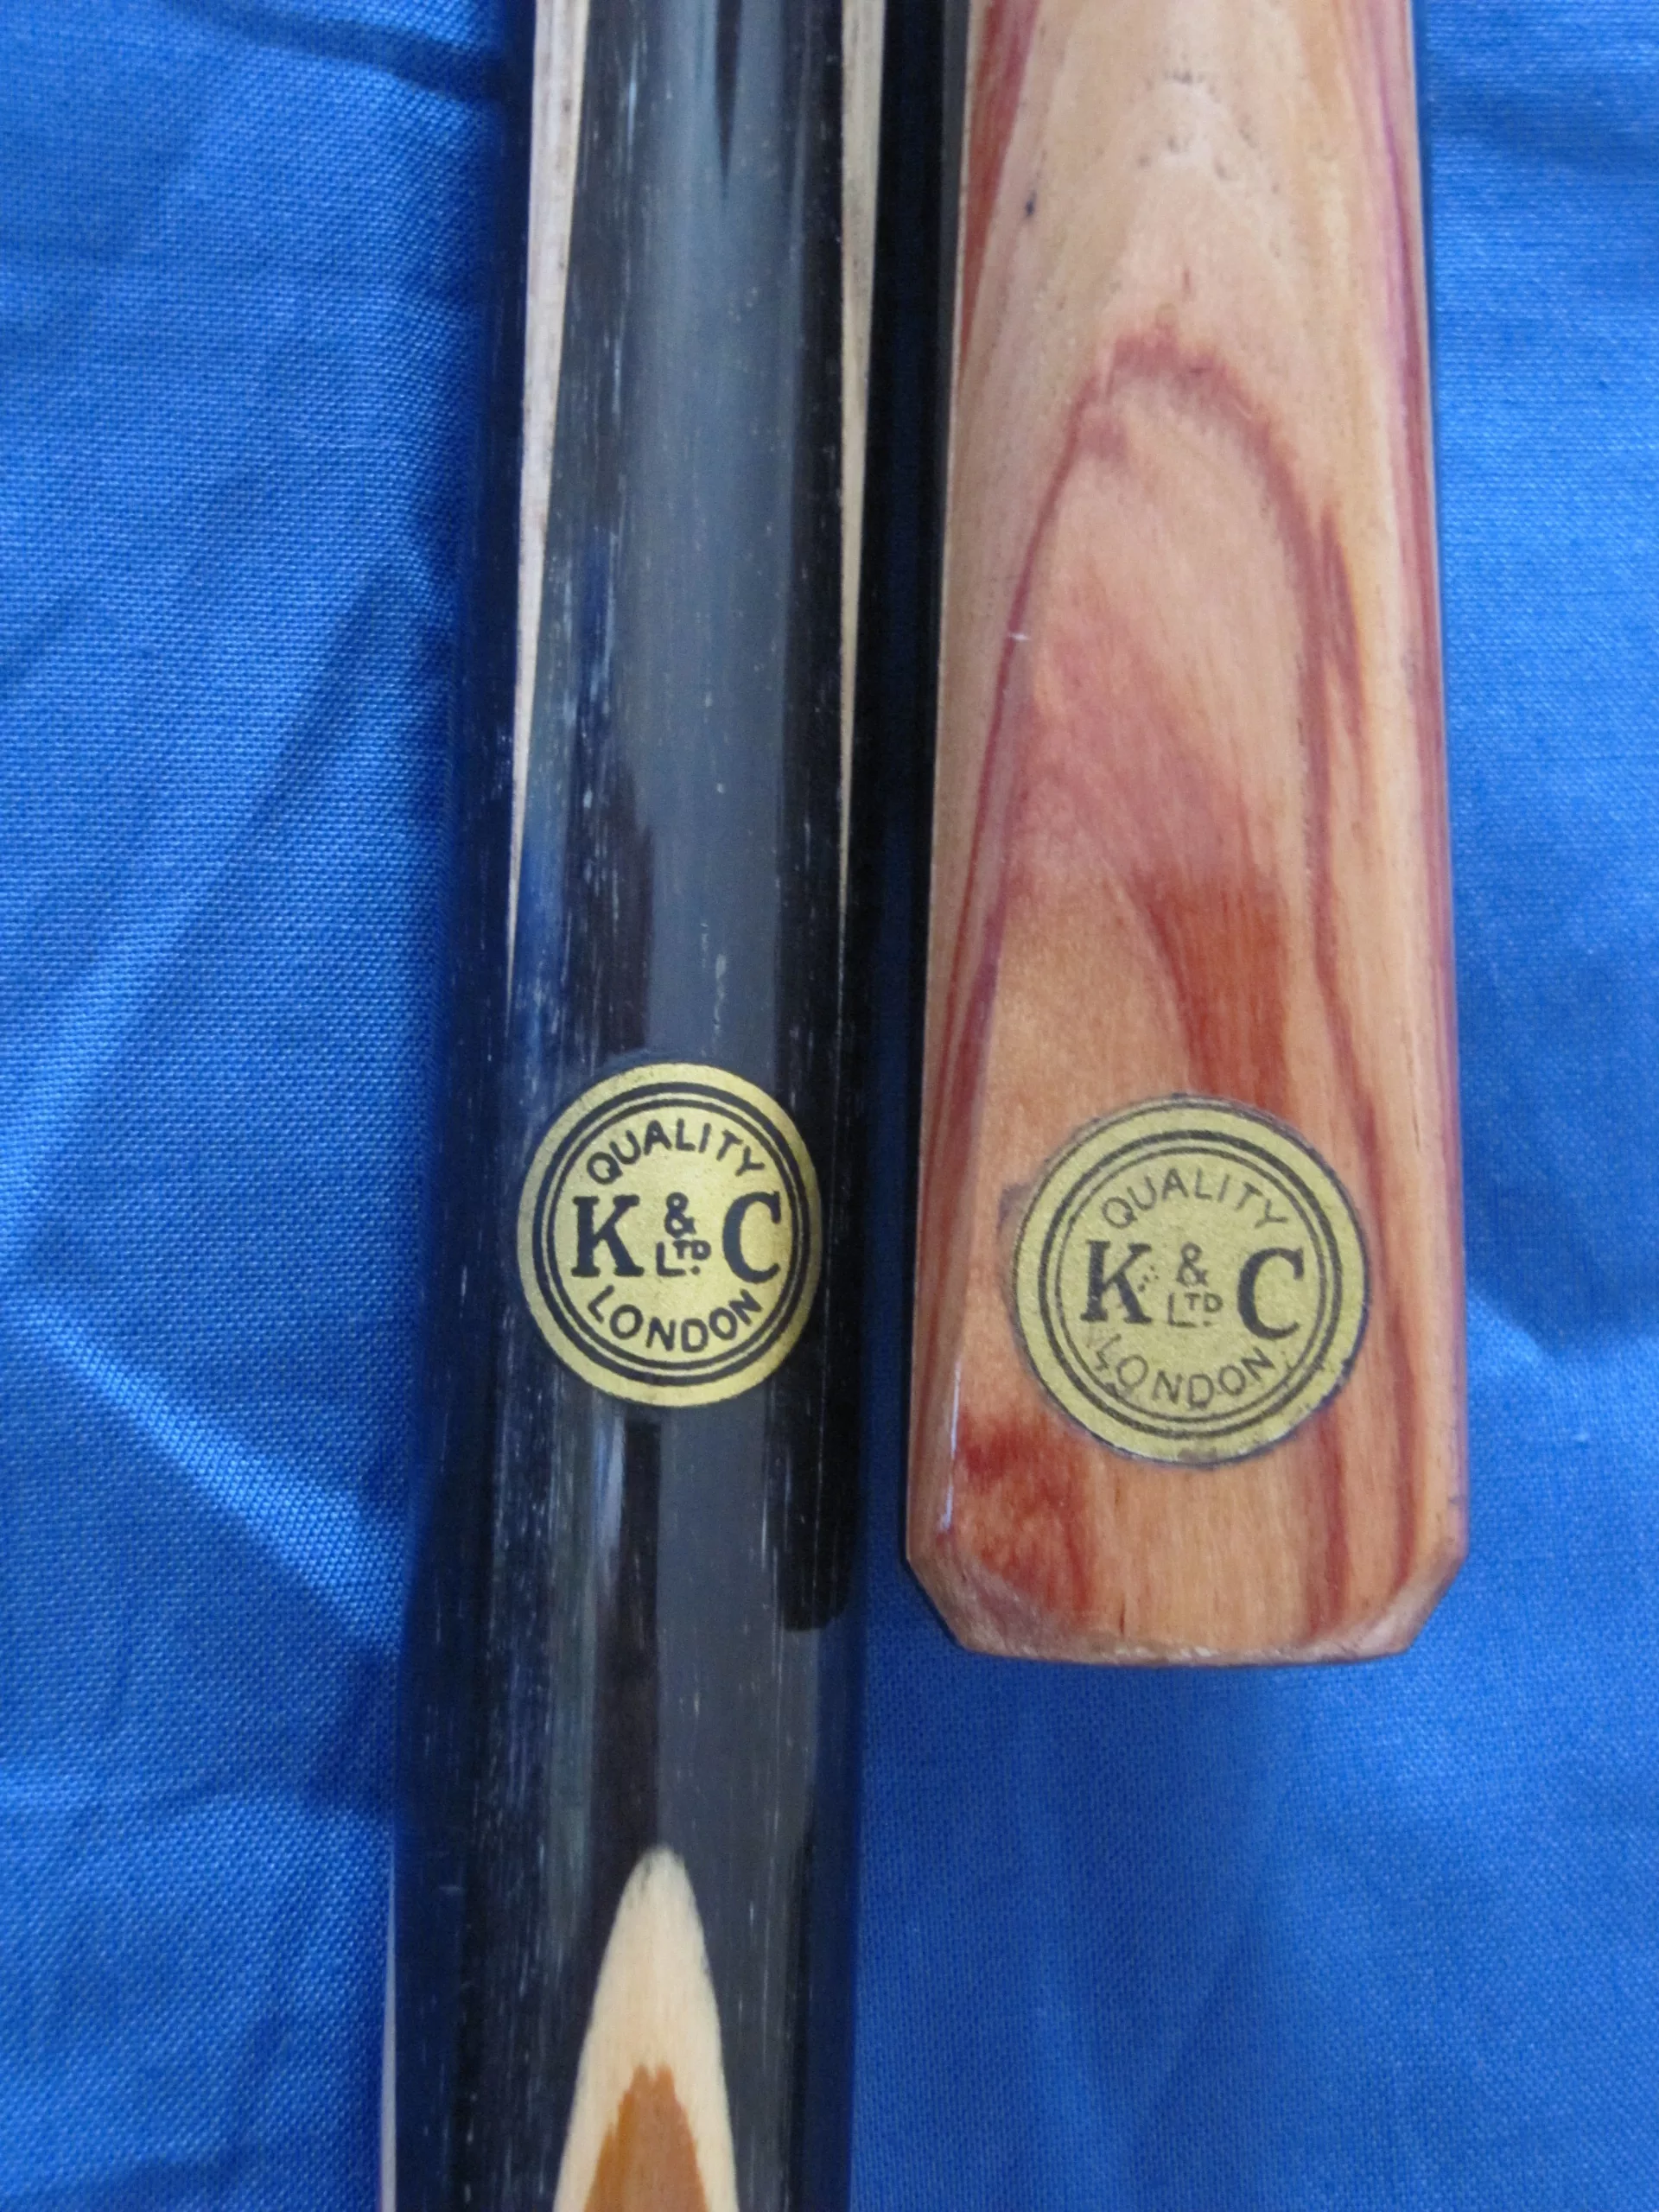 K and C cue